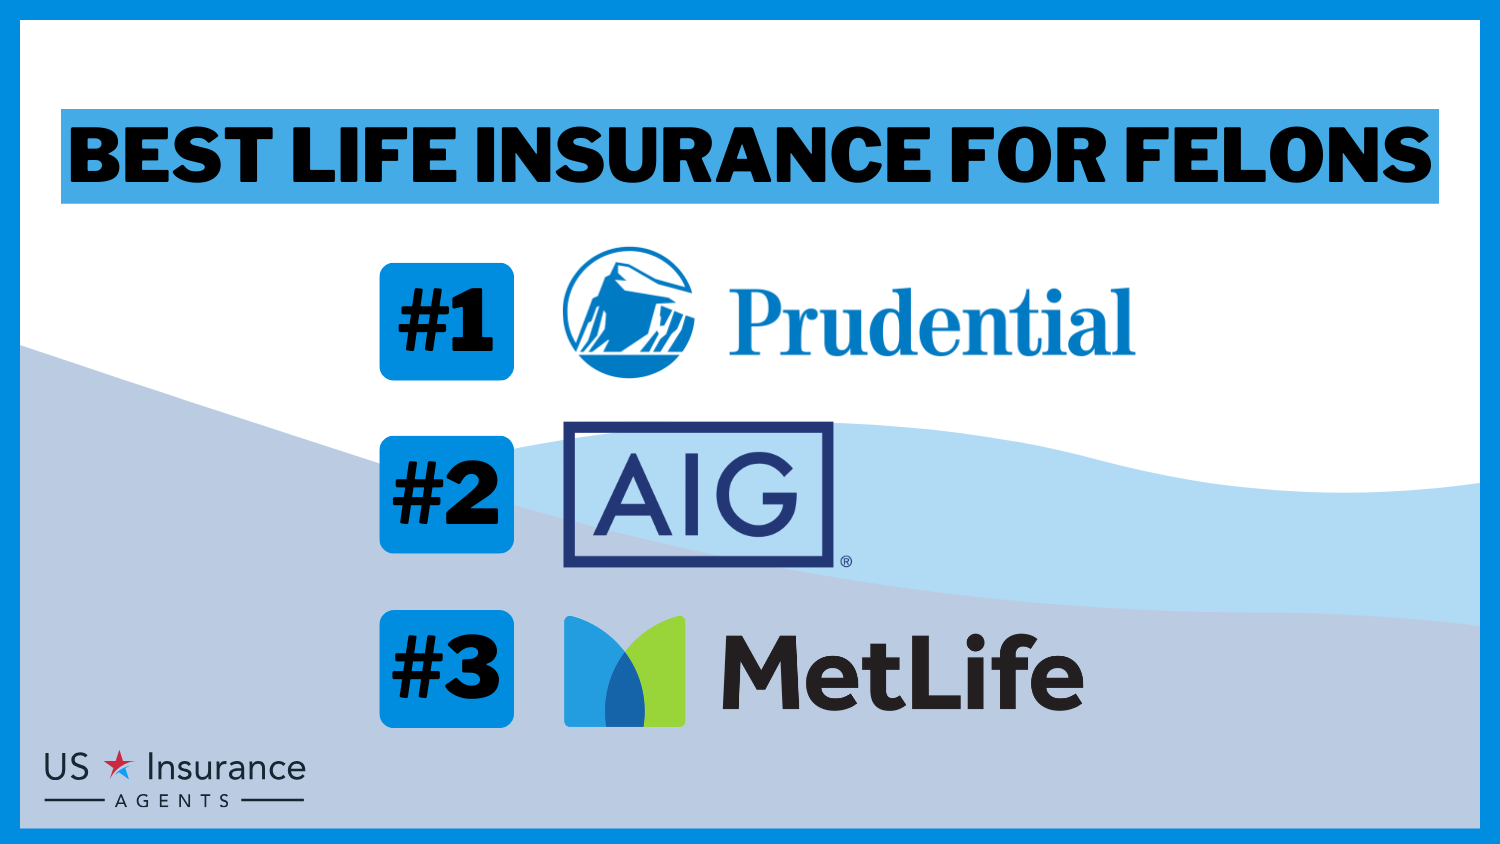 Prudential, AIG, and MetLife: Best Life Insurance for Felons